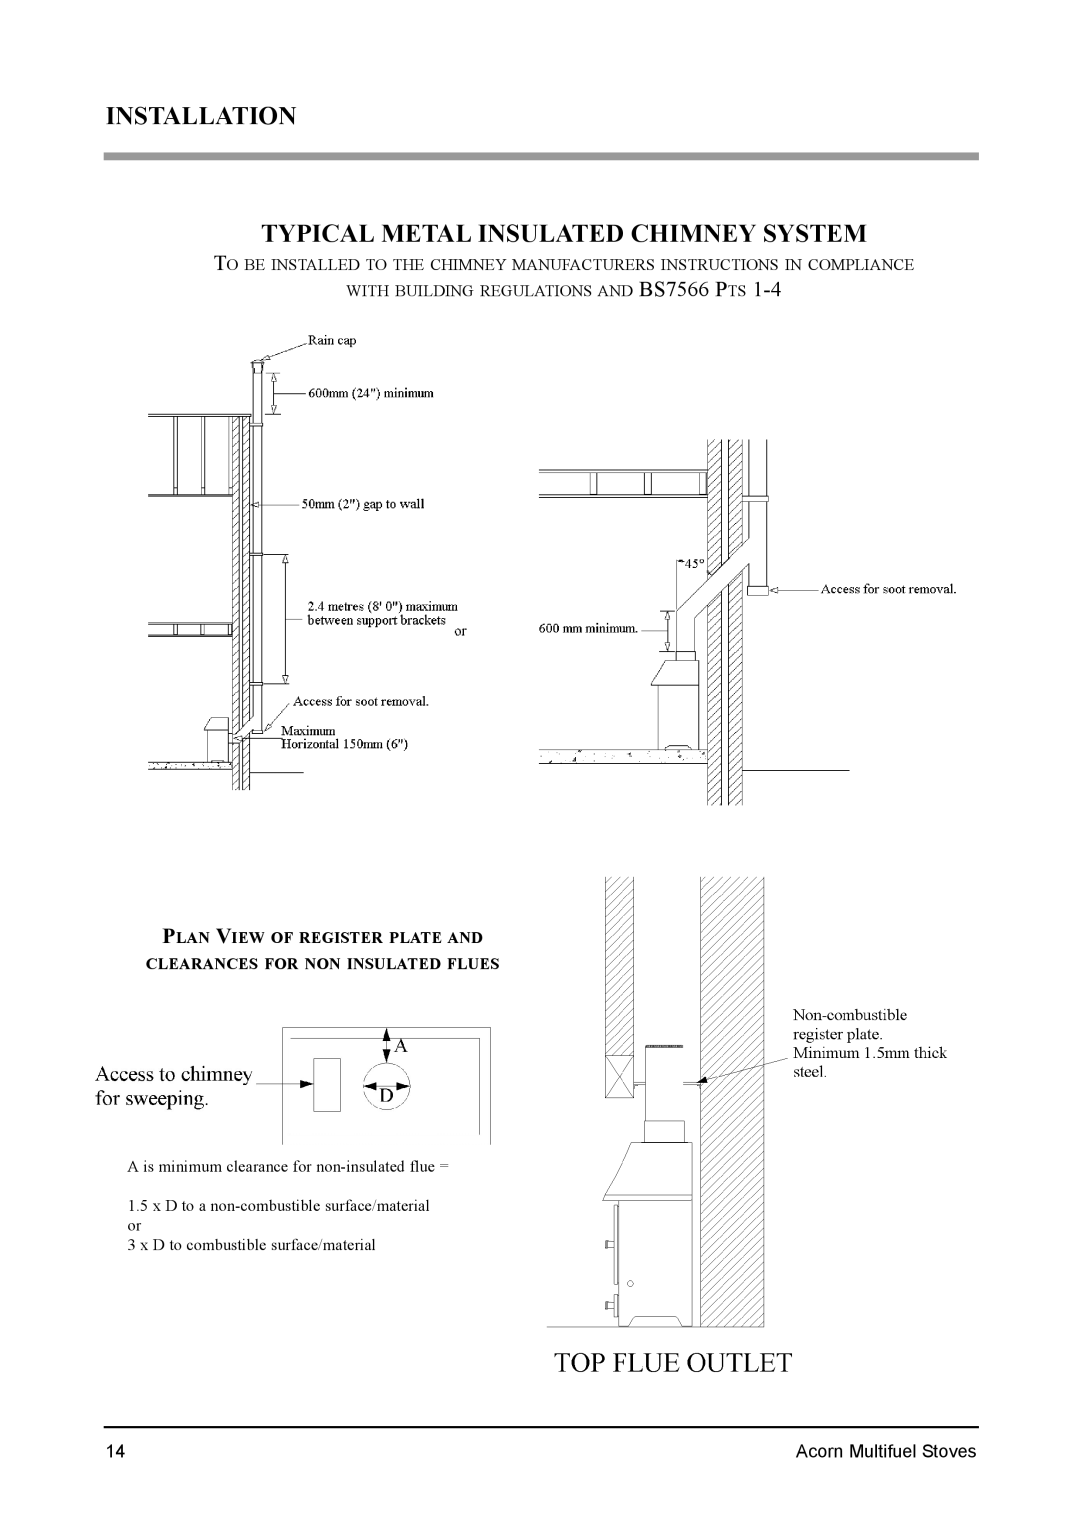 Aarrow Fires Tf 70 installation manual Installation Typical Metal Insulated Chimney System, Acorn Multifuel Stoves 